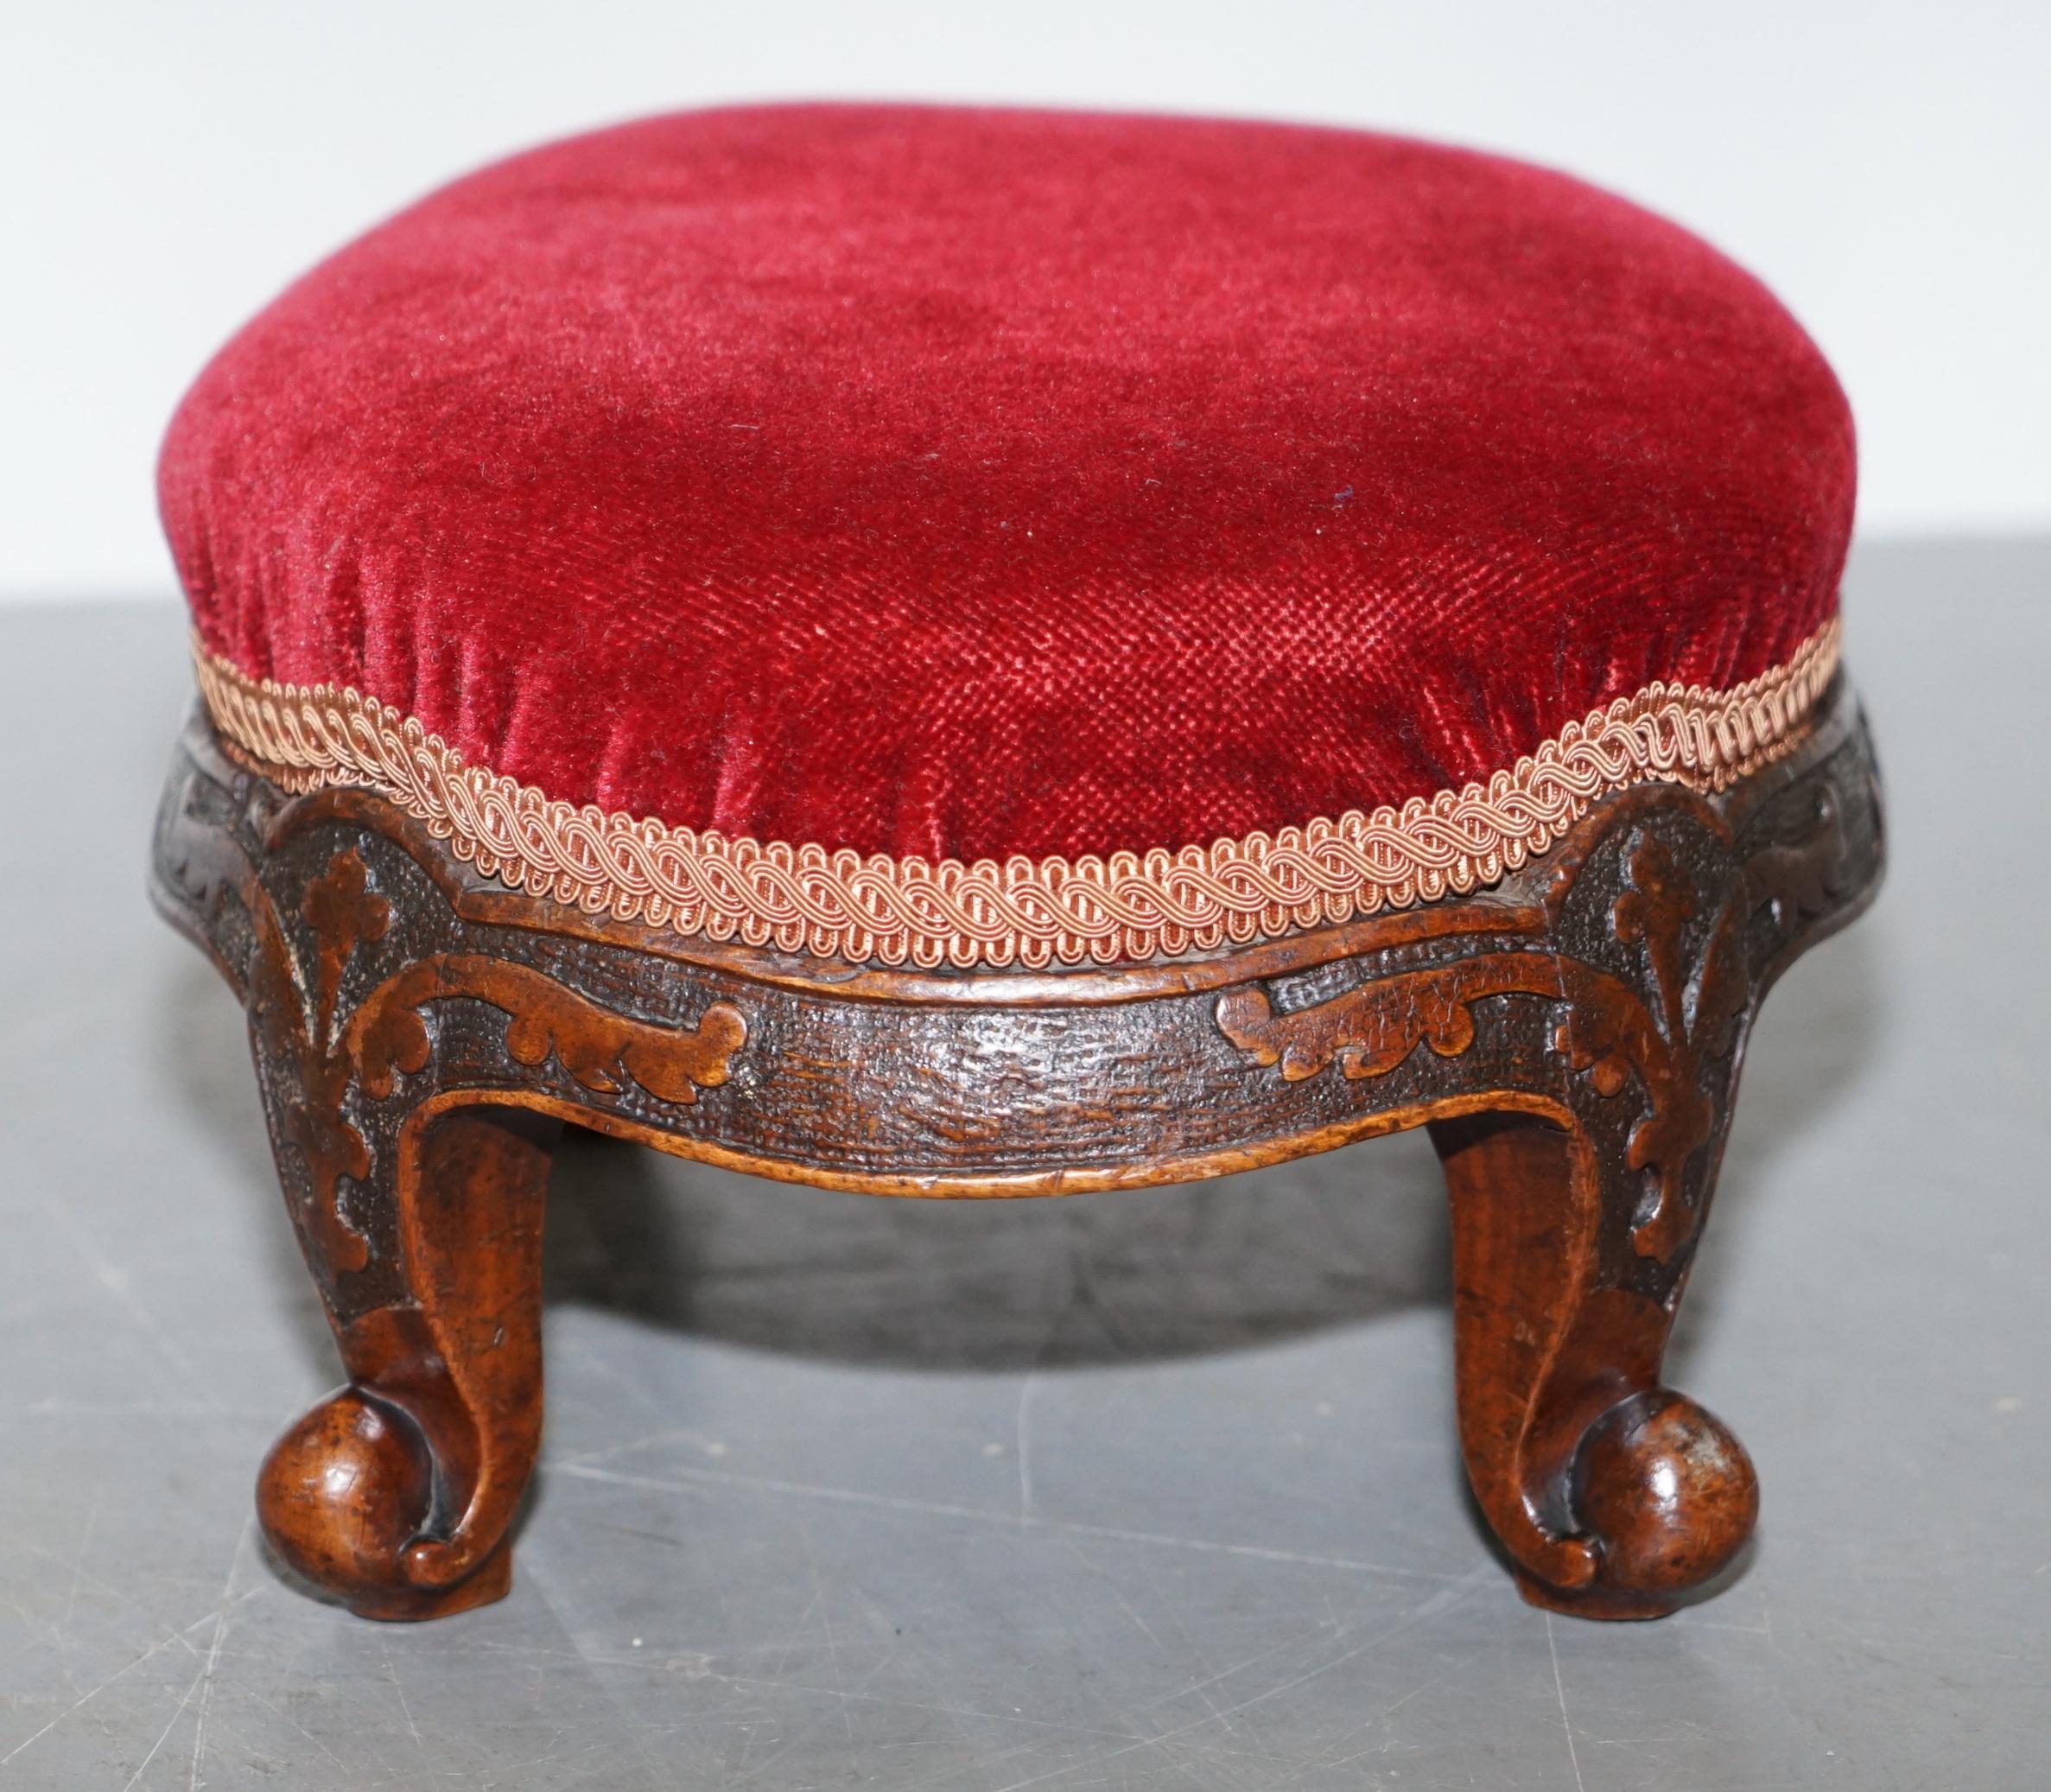 Hand-Crafted Sublime Pair of Original George II circa 1760 English Small Footstools Rare Find